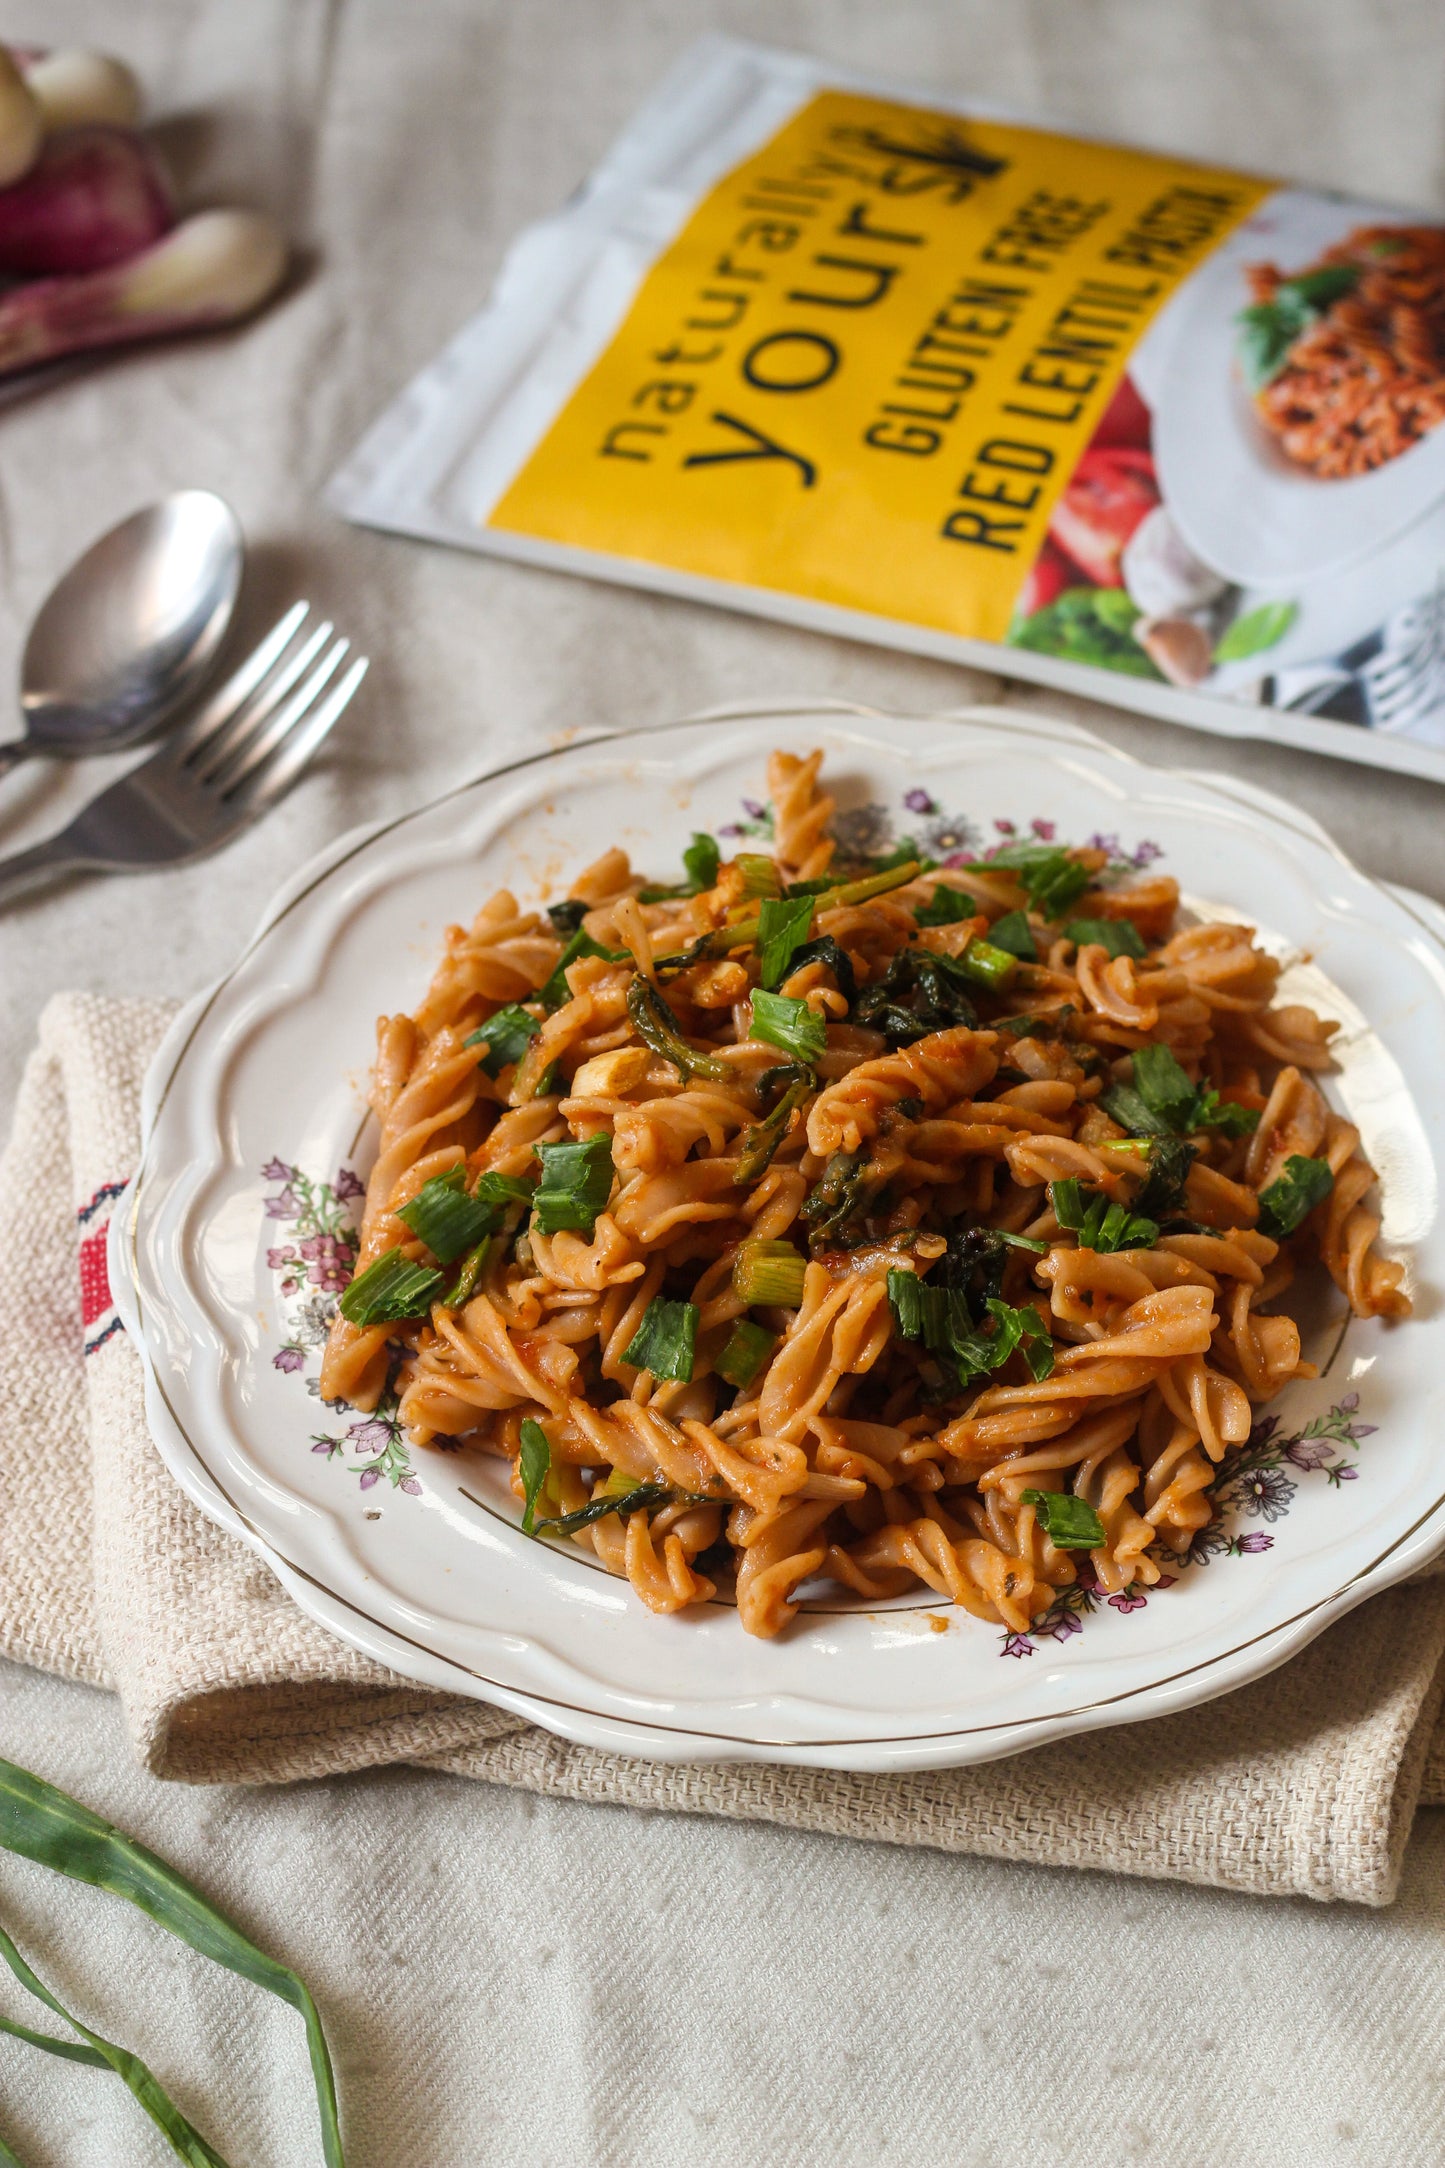 Naturally Yours Gluten Free red Lentil Pasta